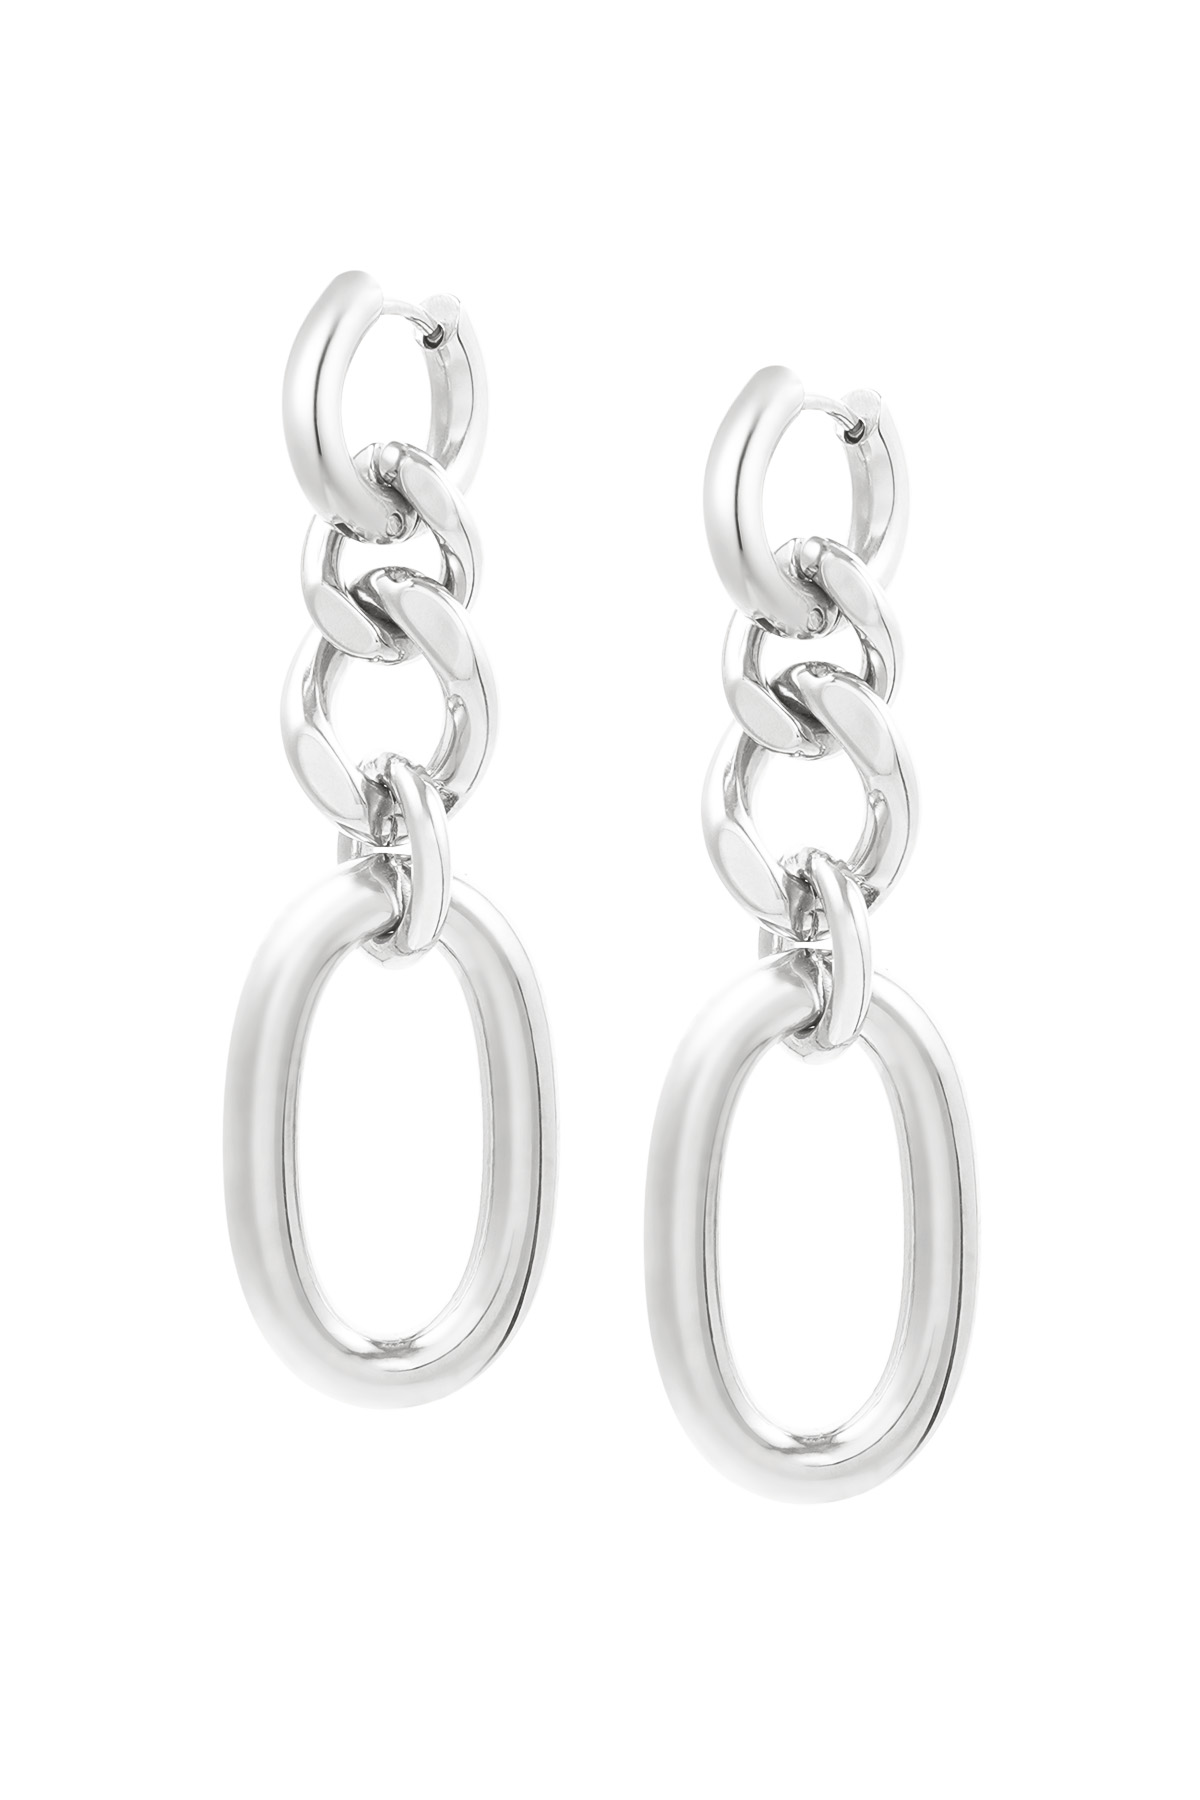 Earrings large/small links - silver h5 